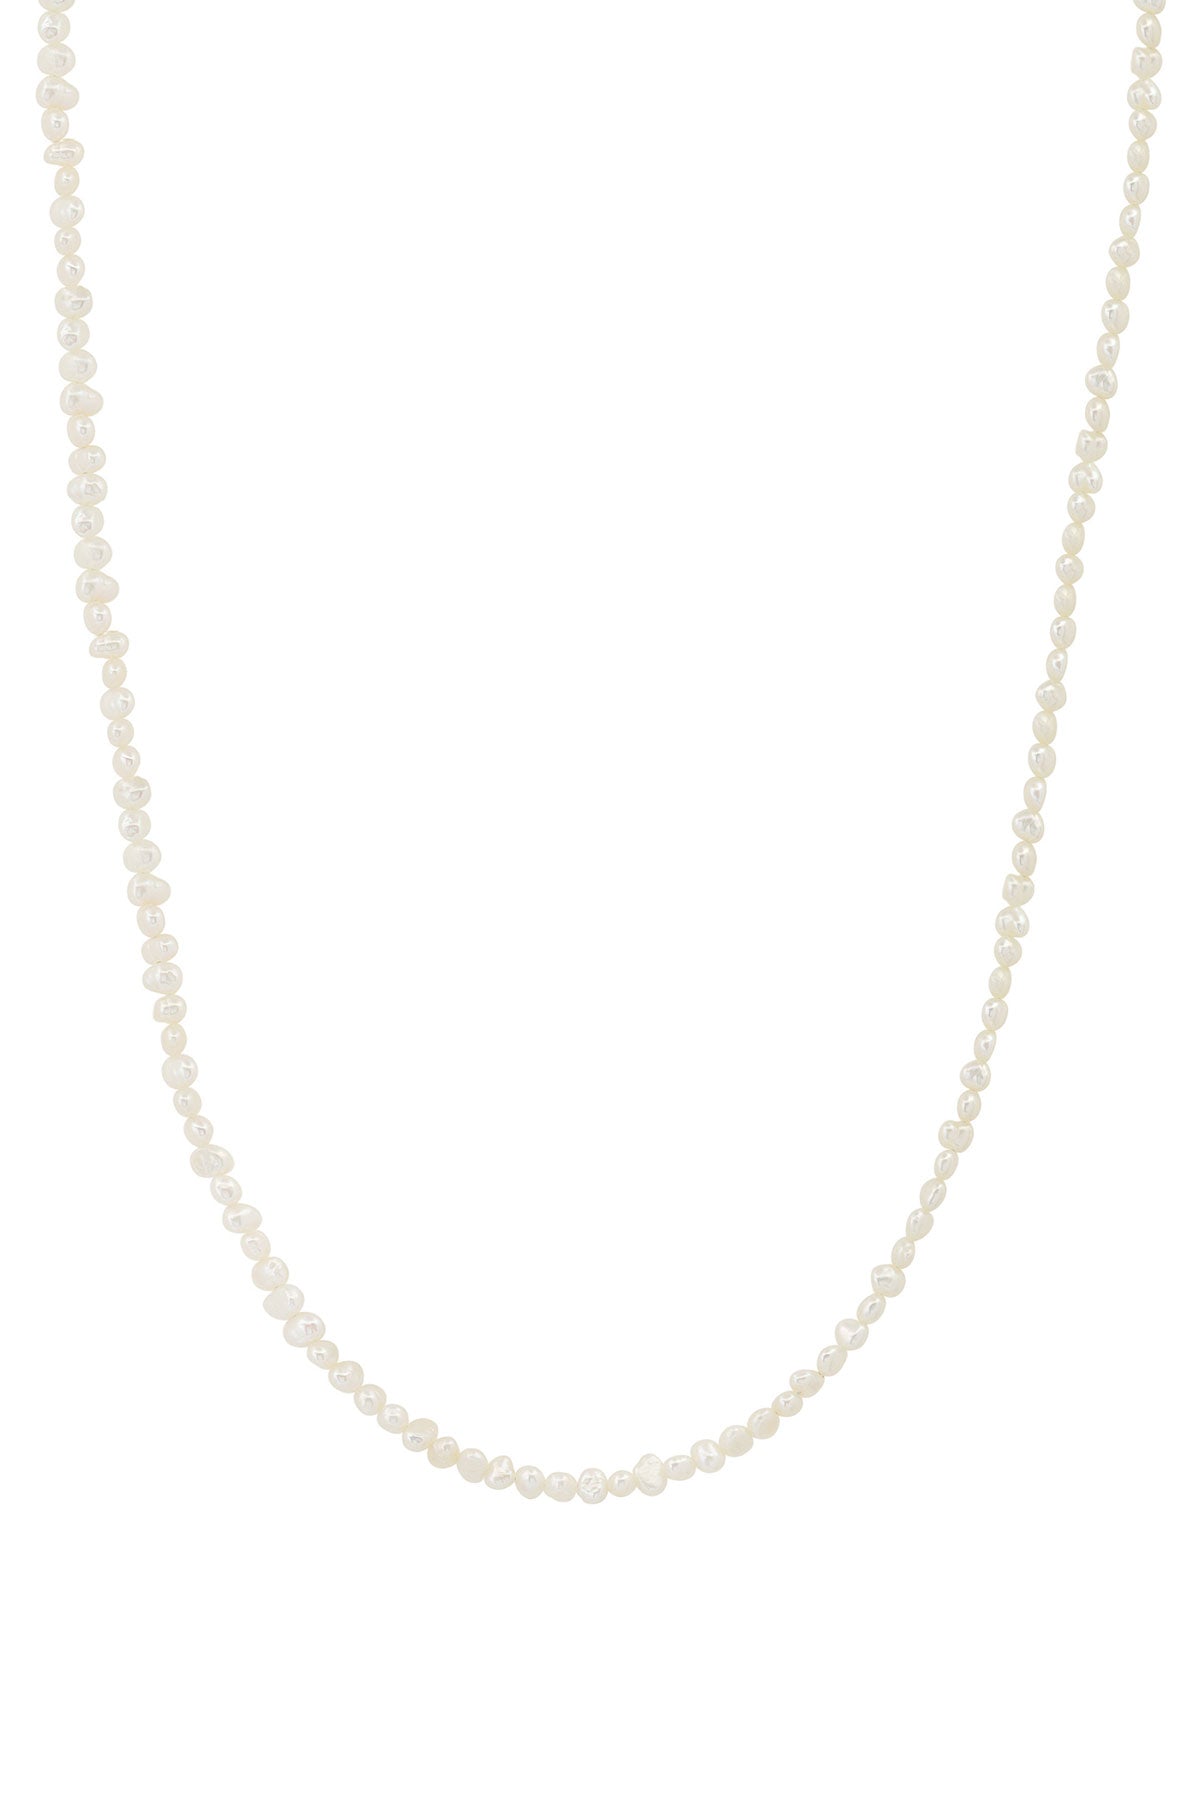 Stephie Necklace-26537702326465